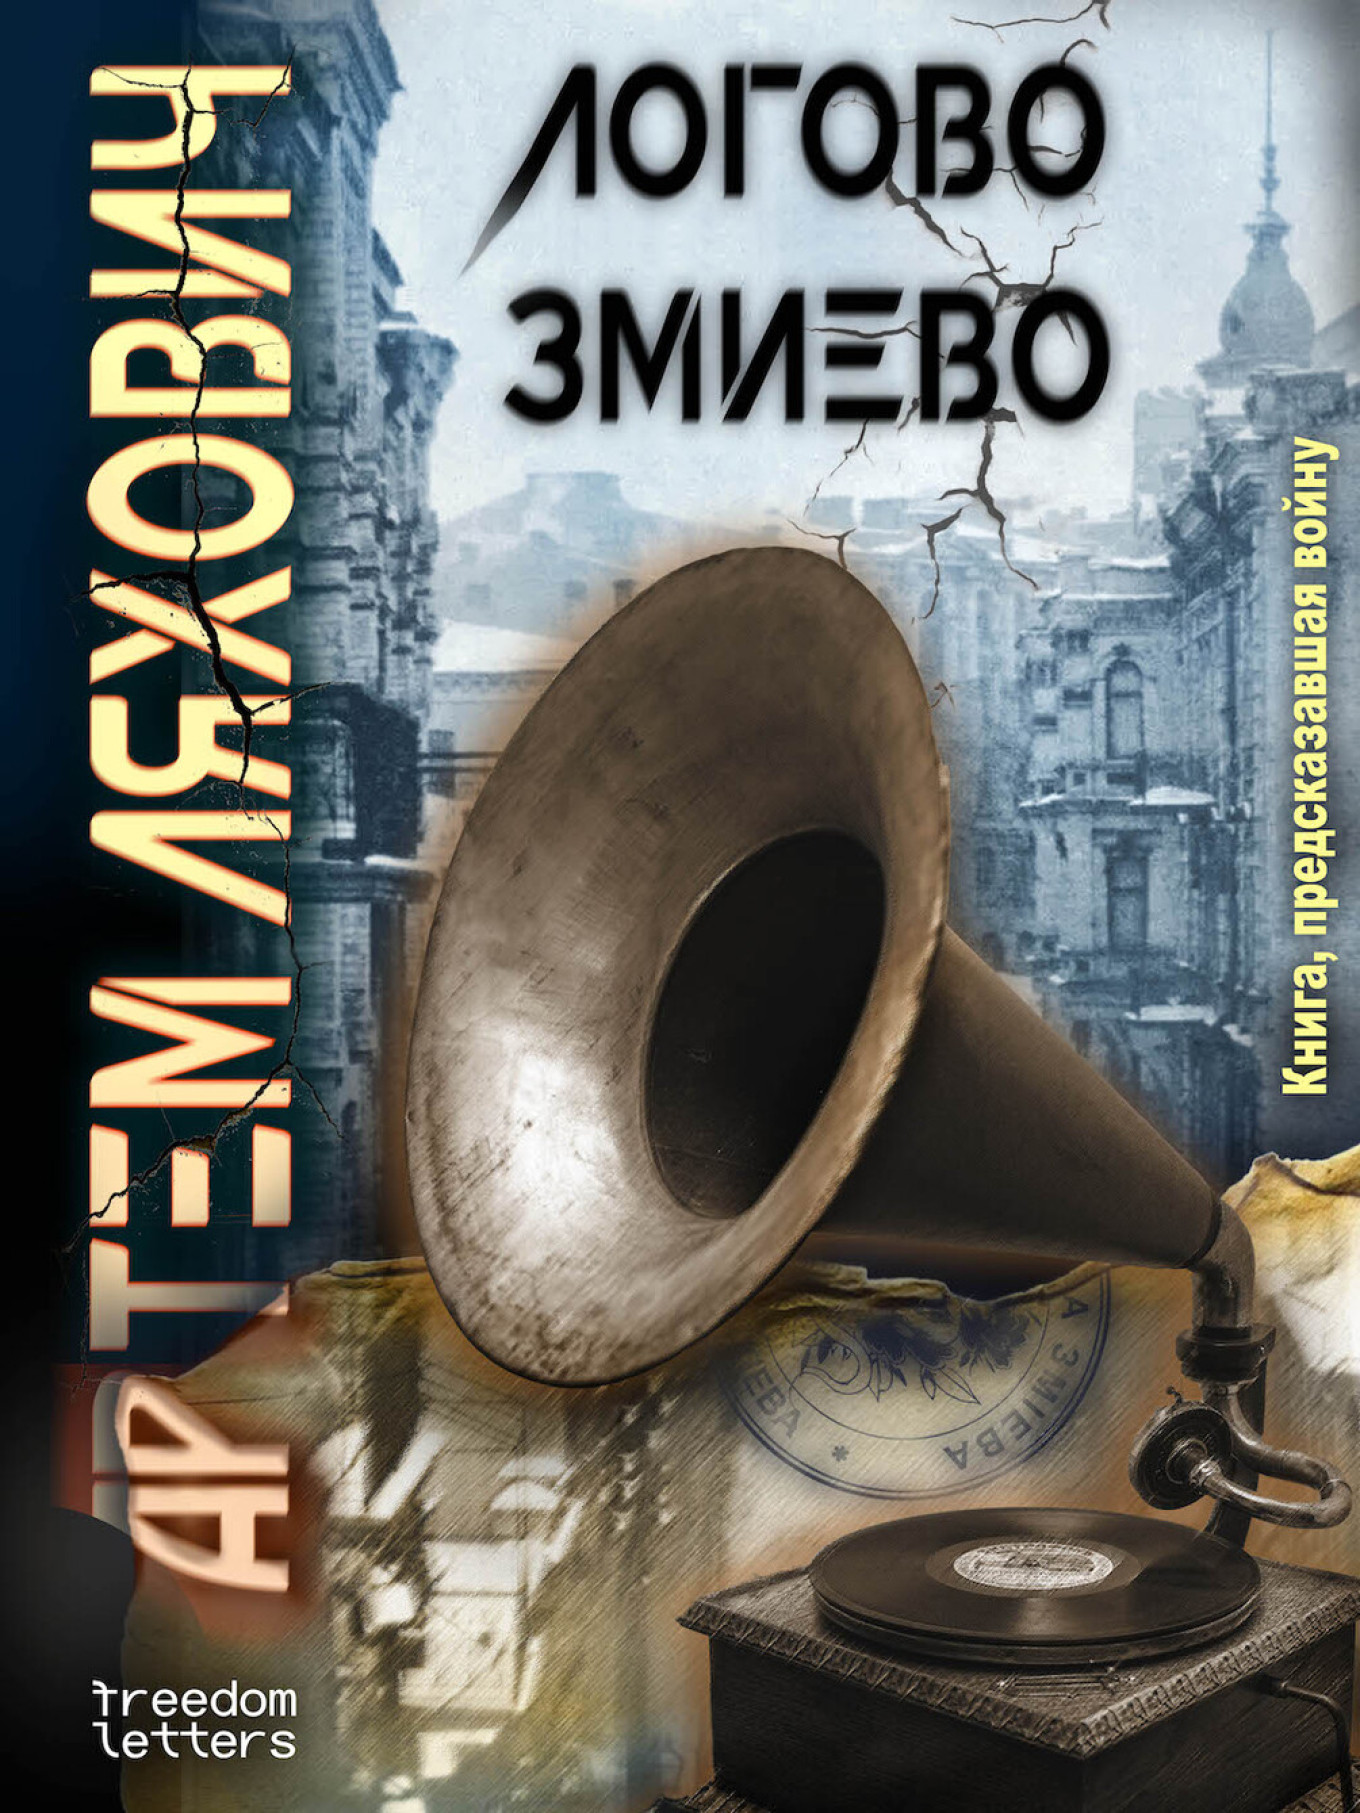  "Lair of Zmievo" by Artyom Lyakhovich. Freedom Letters 